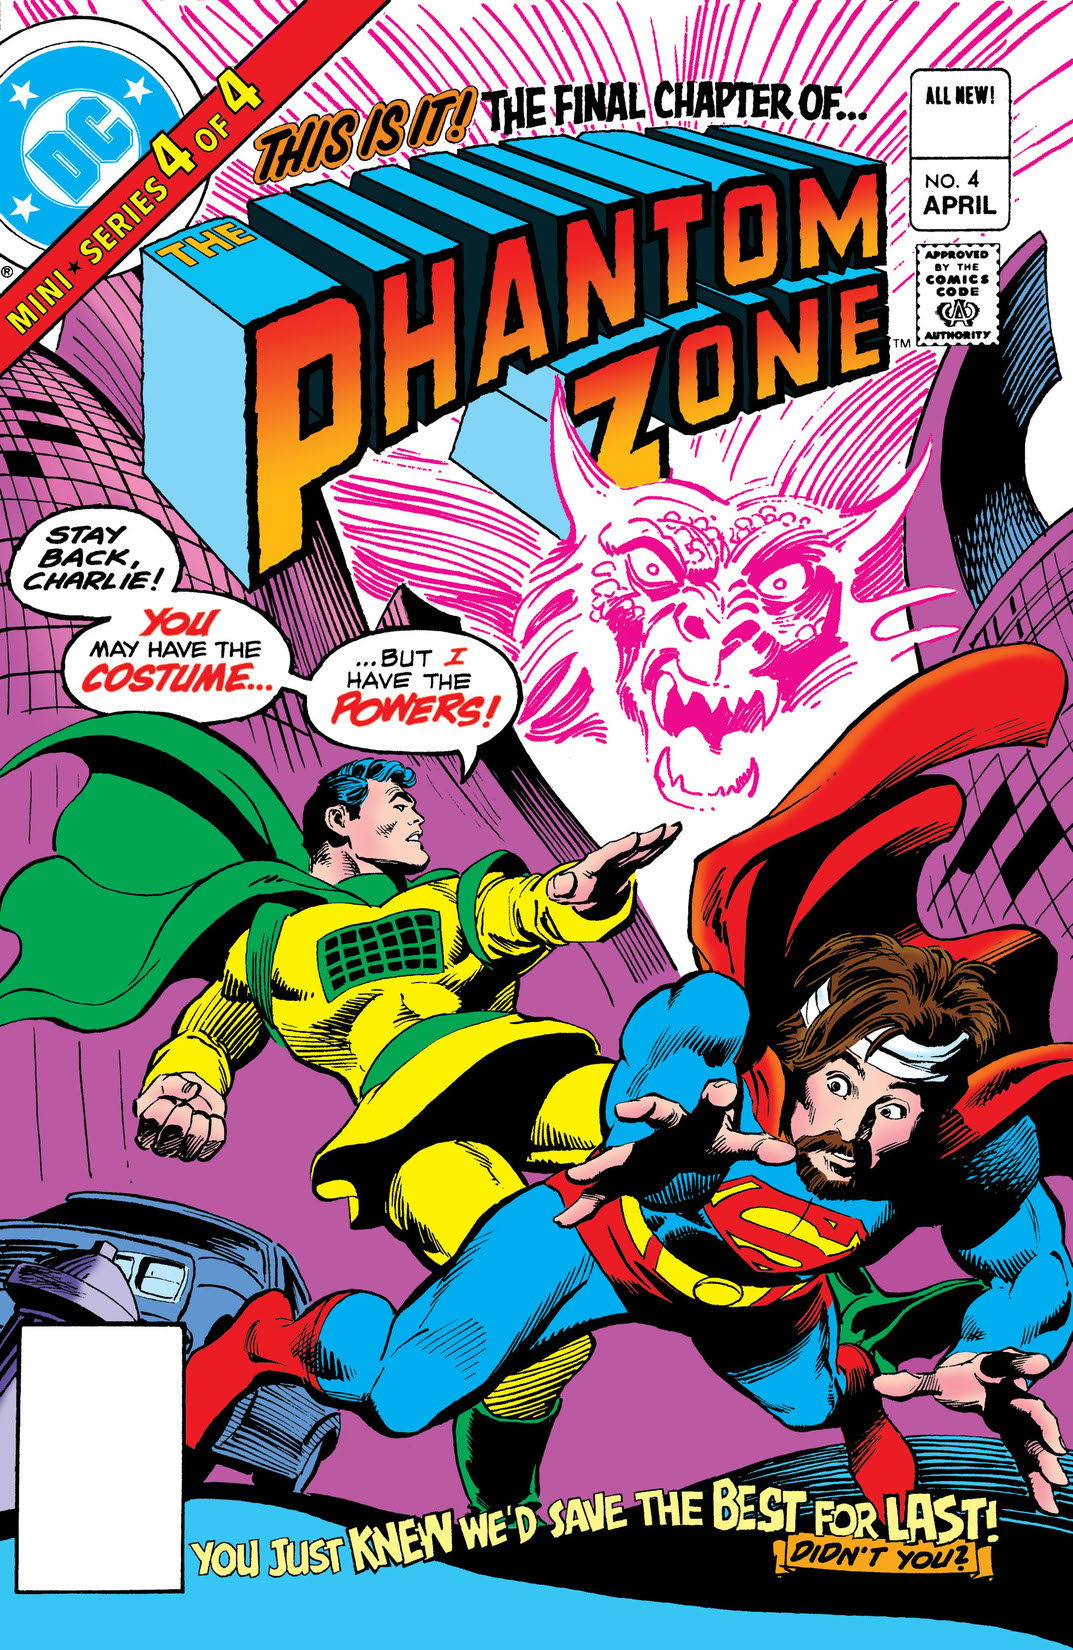 Superman Presents The Phantom Zone #4 preview images